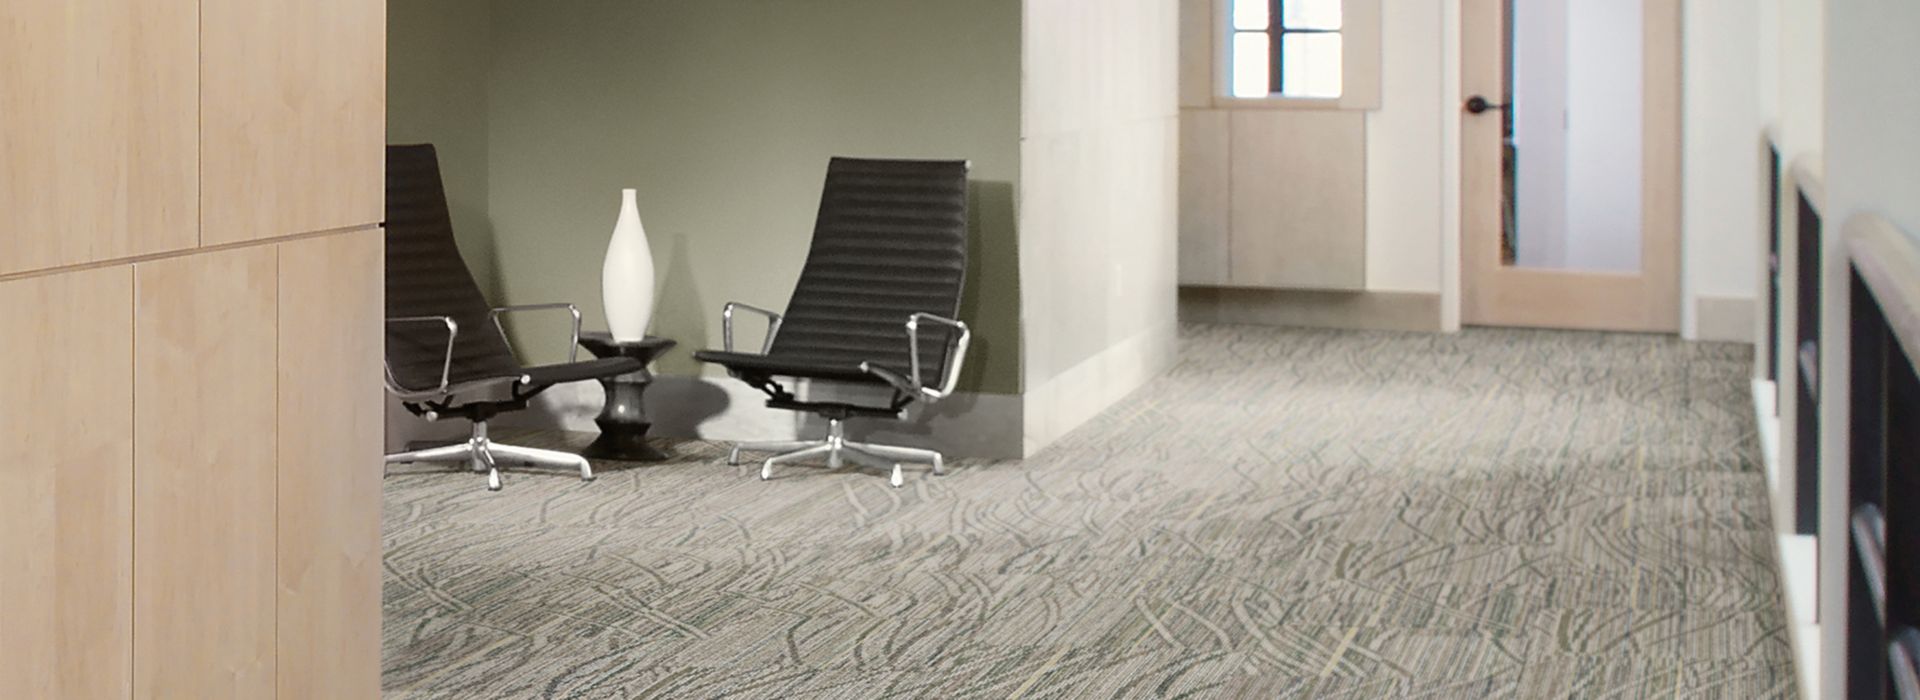 Interface Prairie Grass Loop carpet tile in corridor with seating area on side image number 1